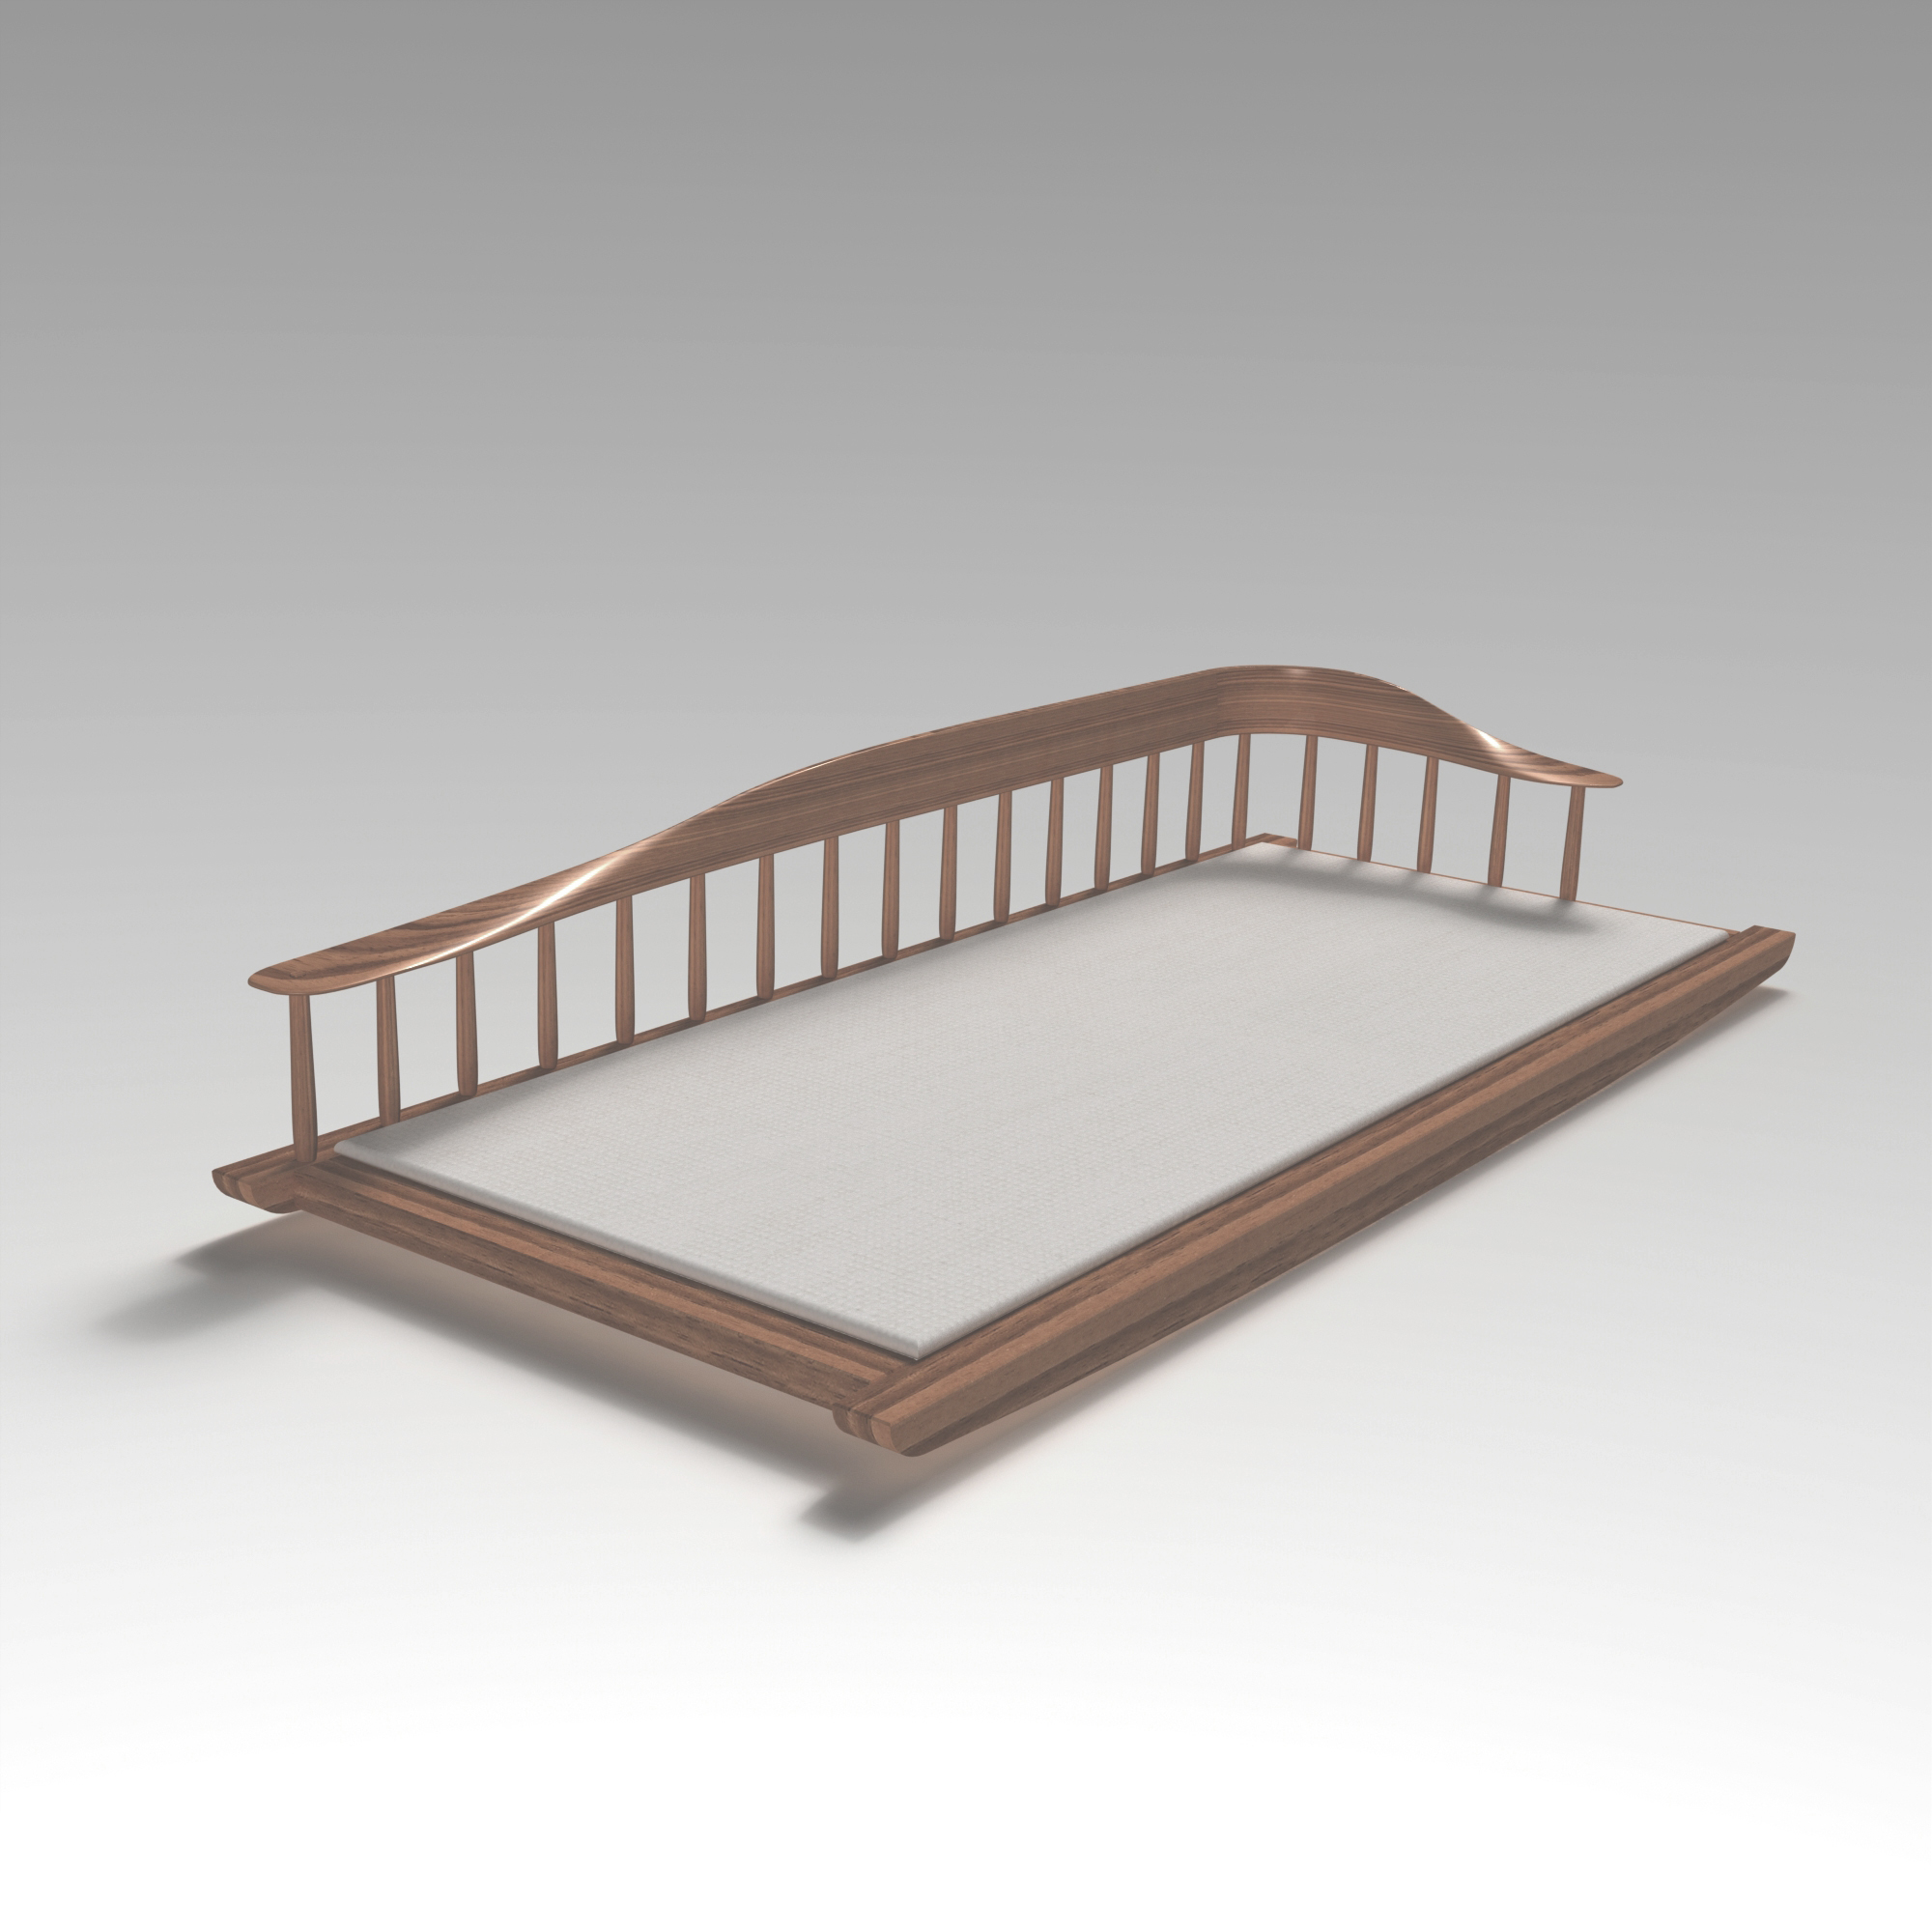 Day bed inspired by Japan and Småland, made in Solidworks, by Sebastian Galo